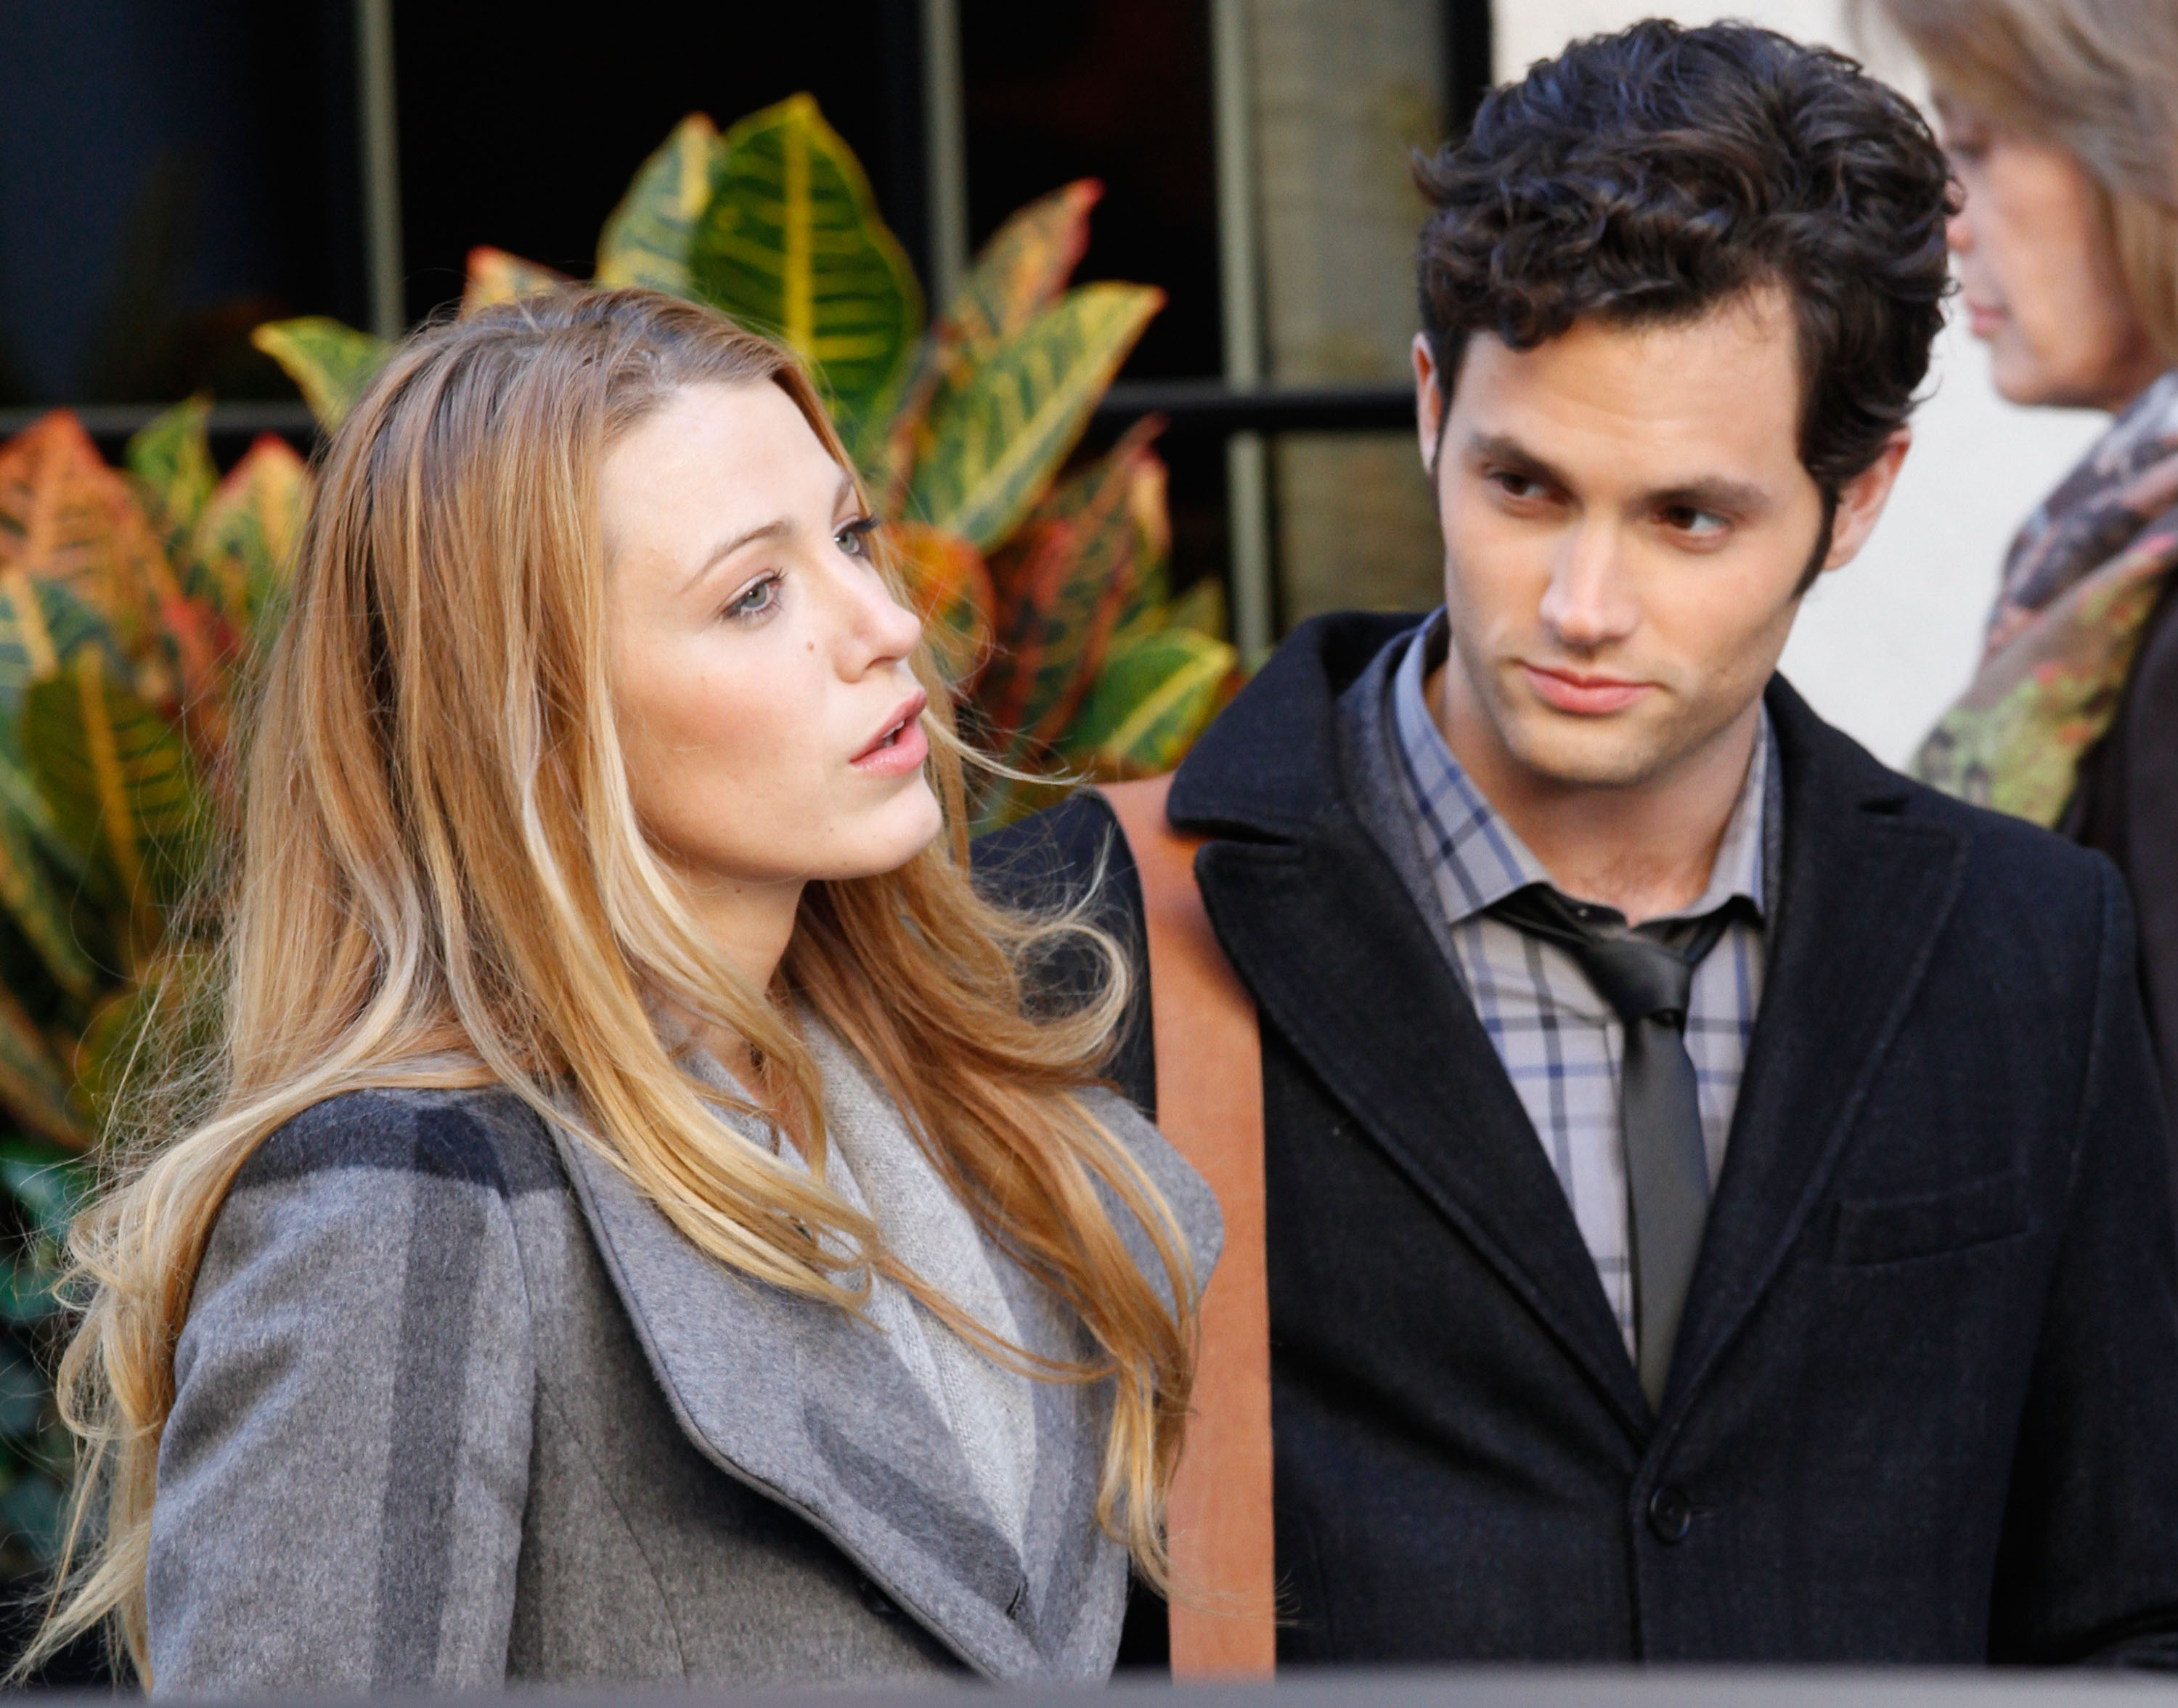 Blake Lively and Penn Badgley on the set of 'Gossip Girl' in 2010